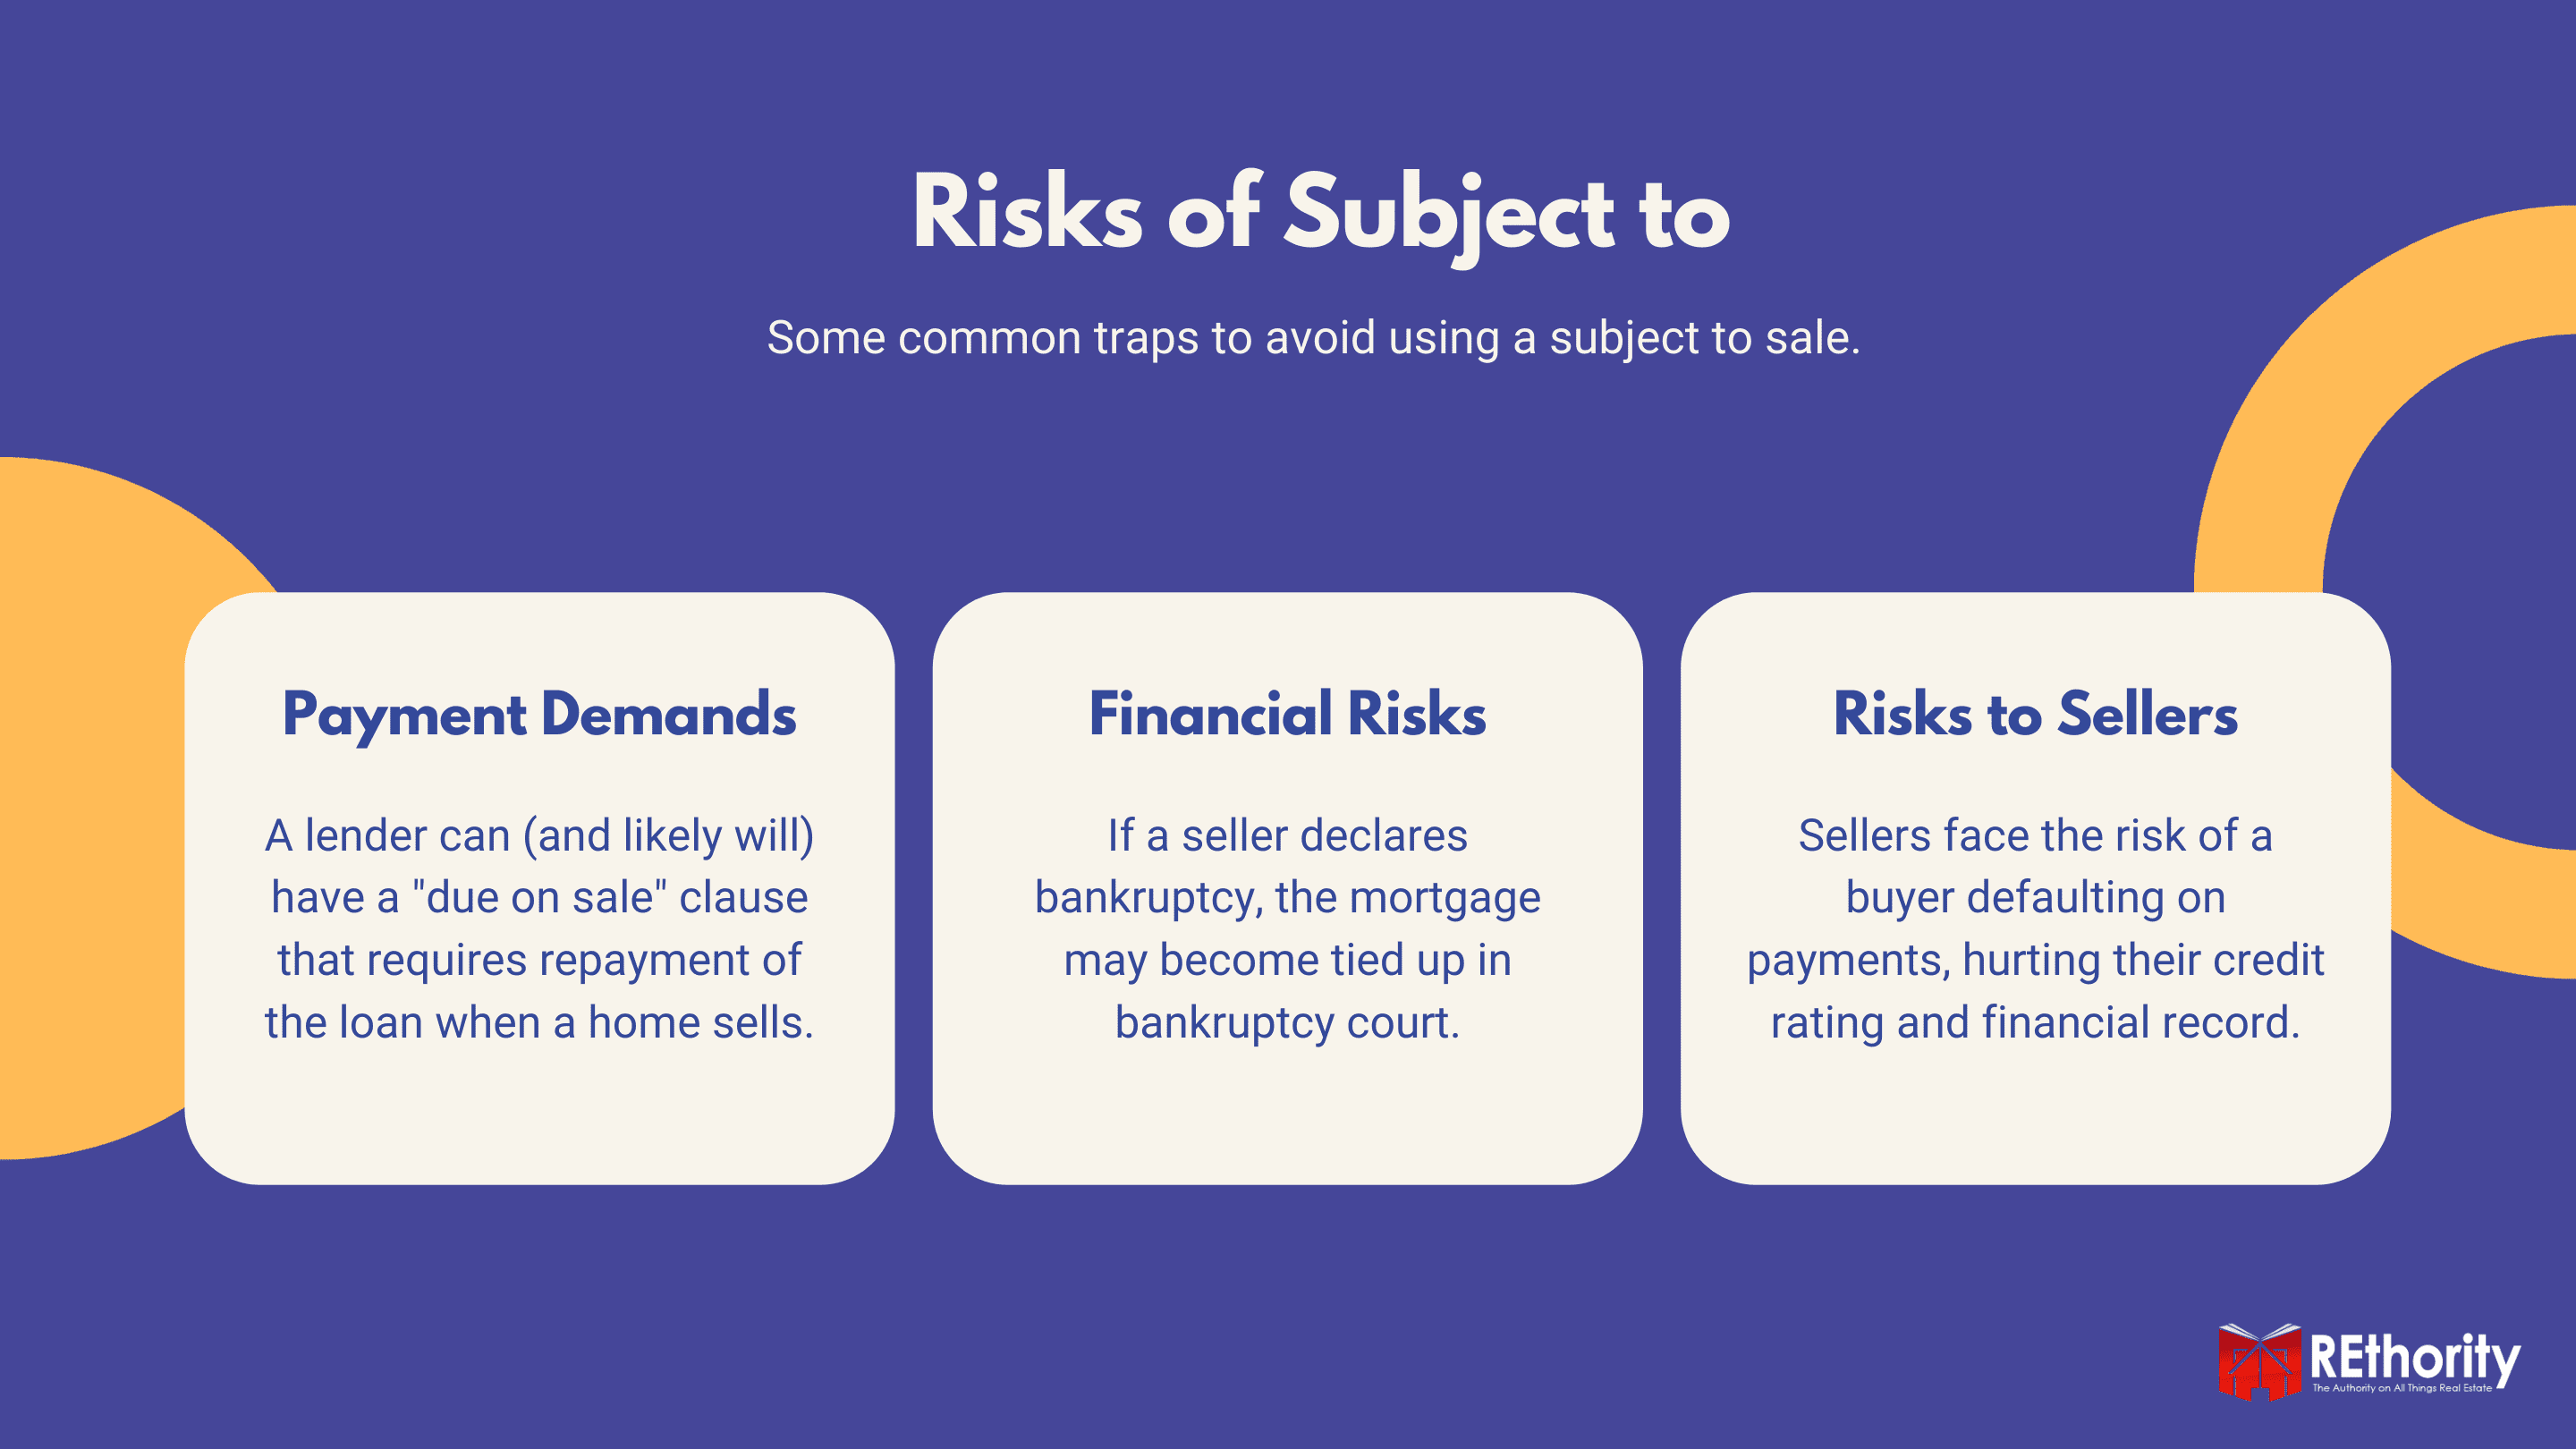 Risks of Subject To Home Sales